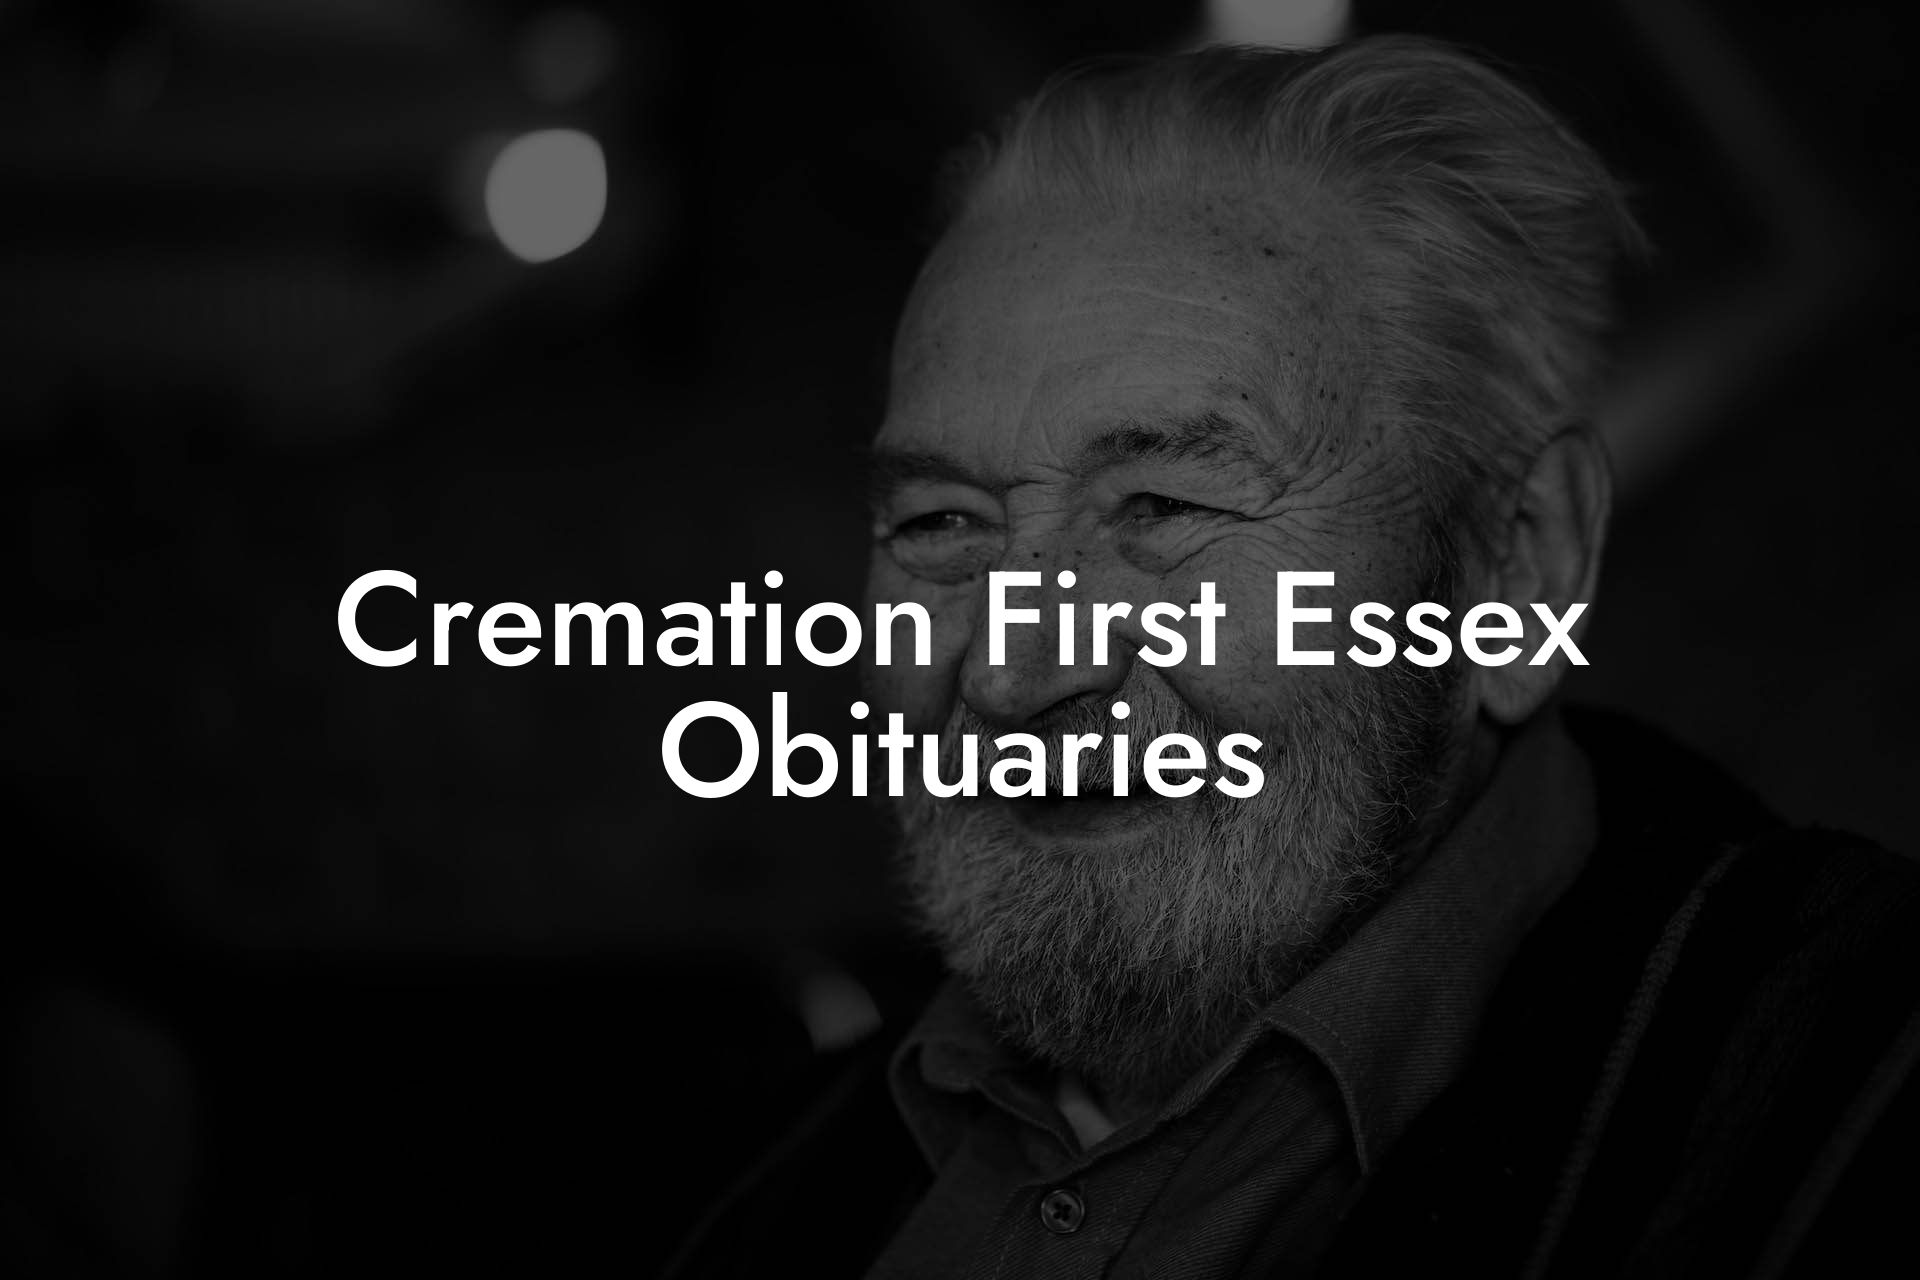 Cremation First Essex Obituaries